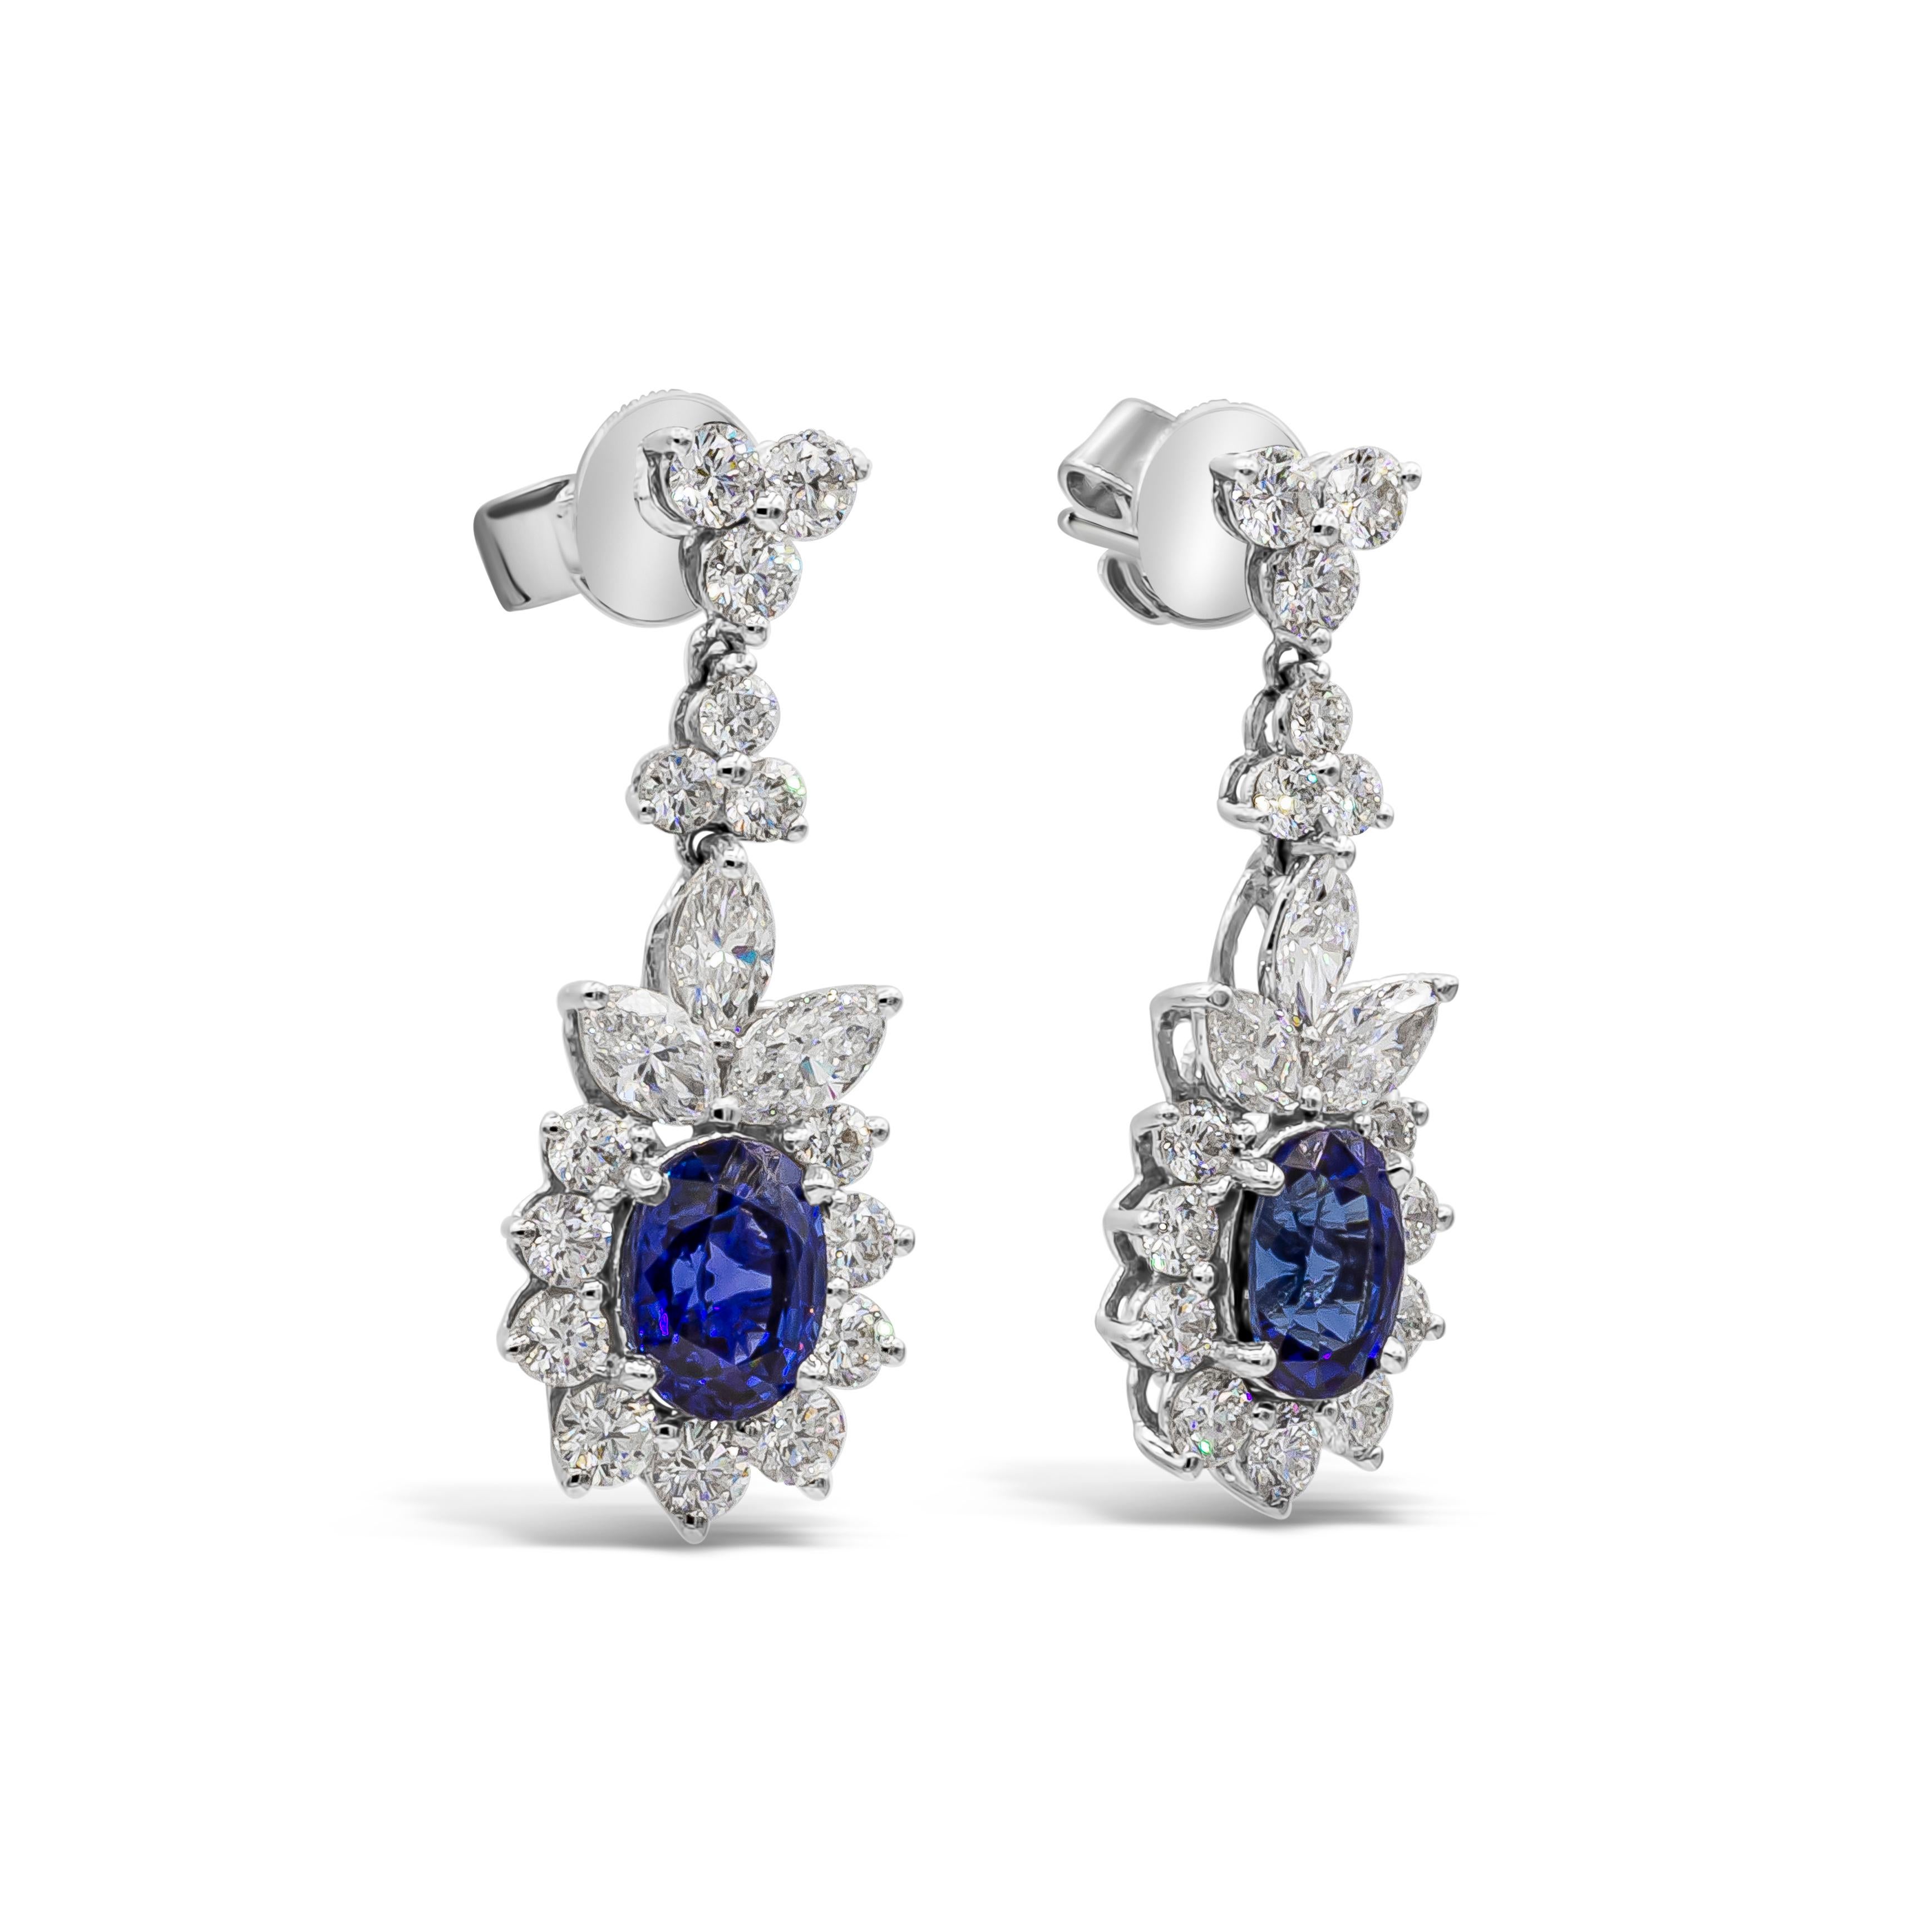 These elegant and classic dangle earrings showcasing beautiful oval cut blue sapphires weighing 3.72 carats total. Accented by a row of round brilliant diamonds in a halo design, suspended and spaced by marquis cut diamonds and attached to a 3 stone